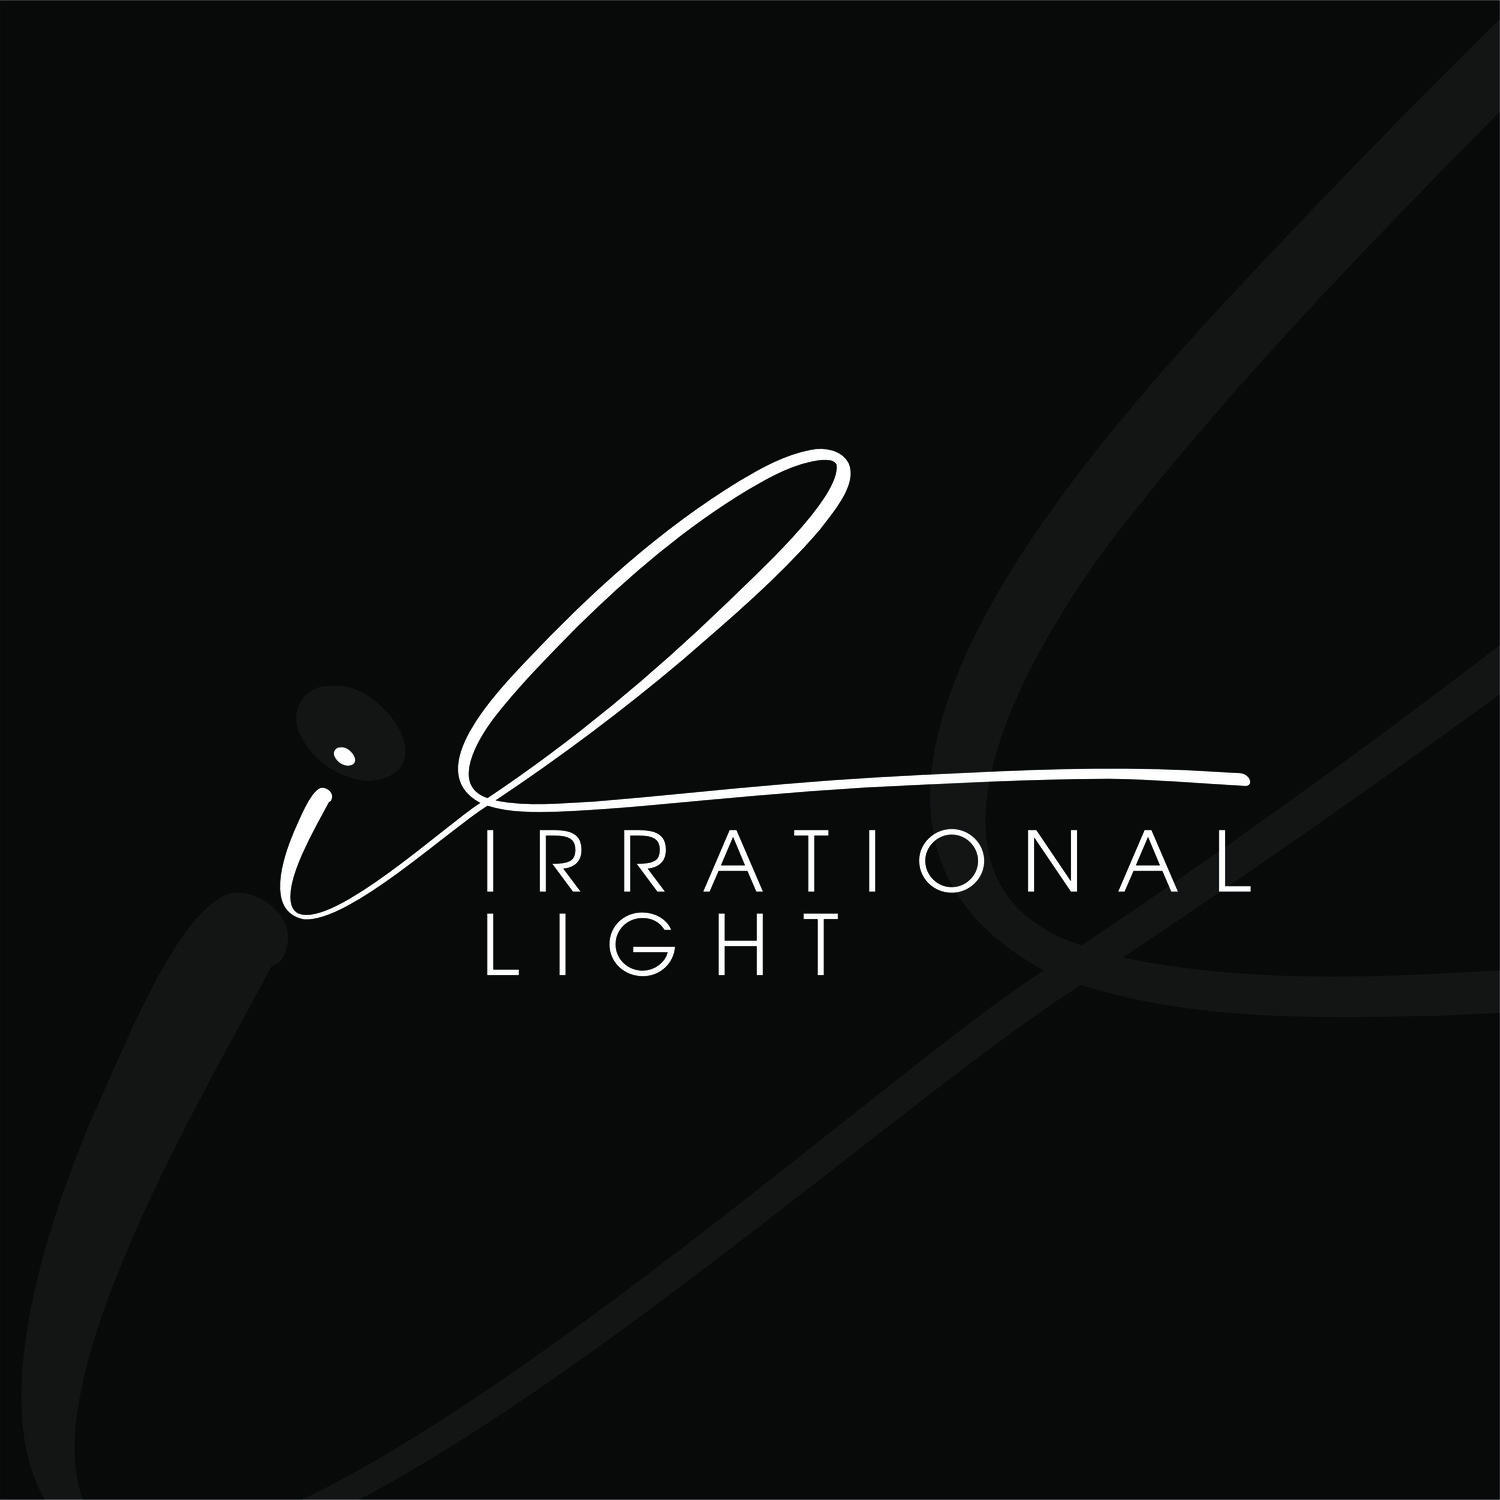 The Irrational Light Gallery